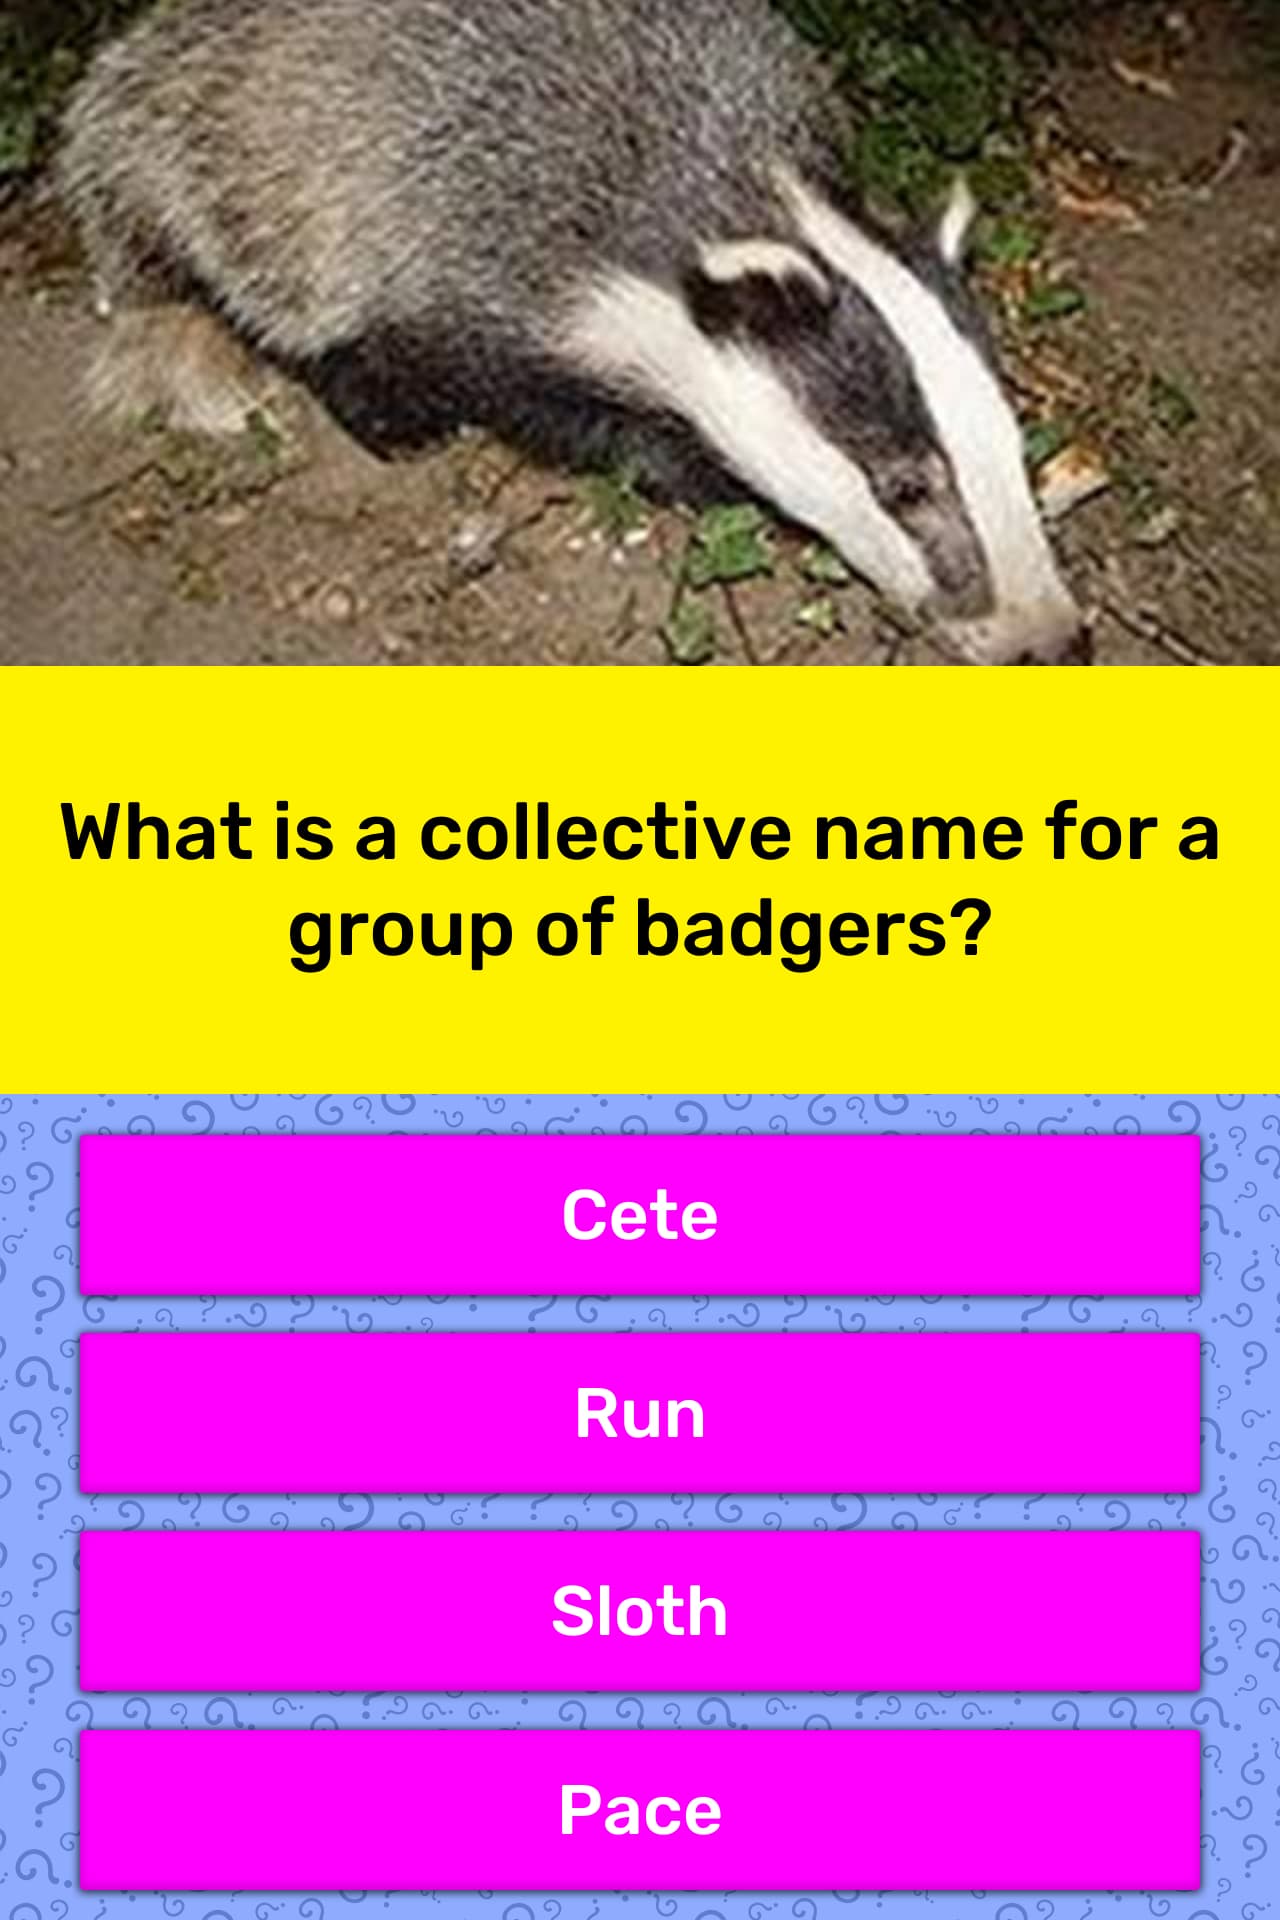 What is the collective name for a group of badgers?